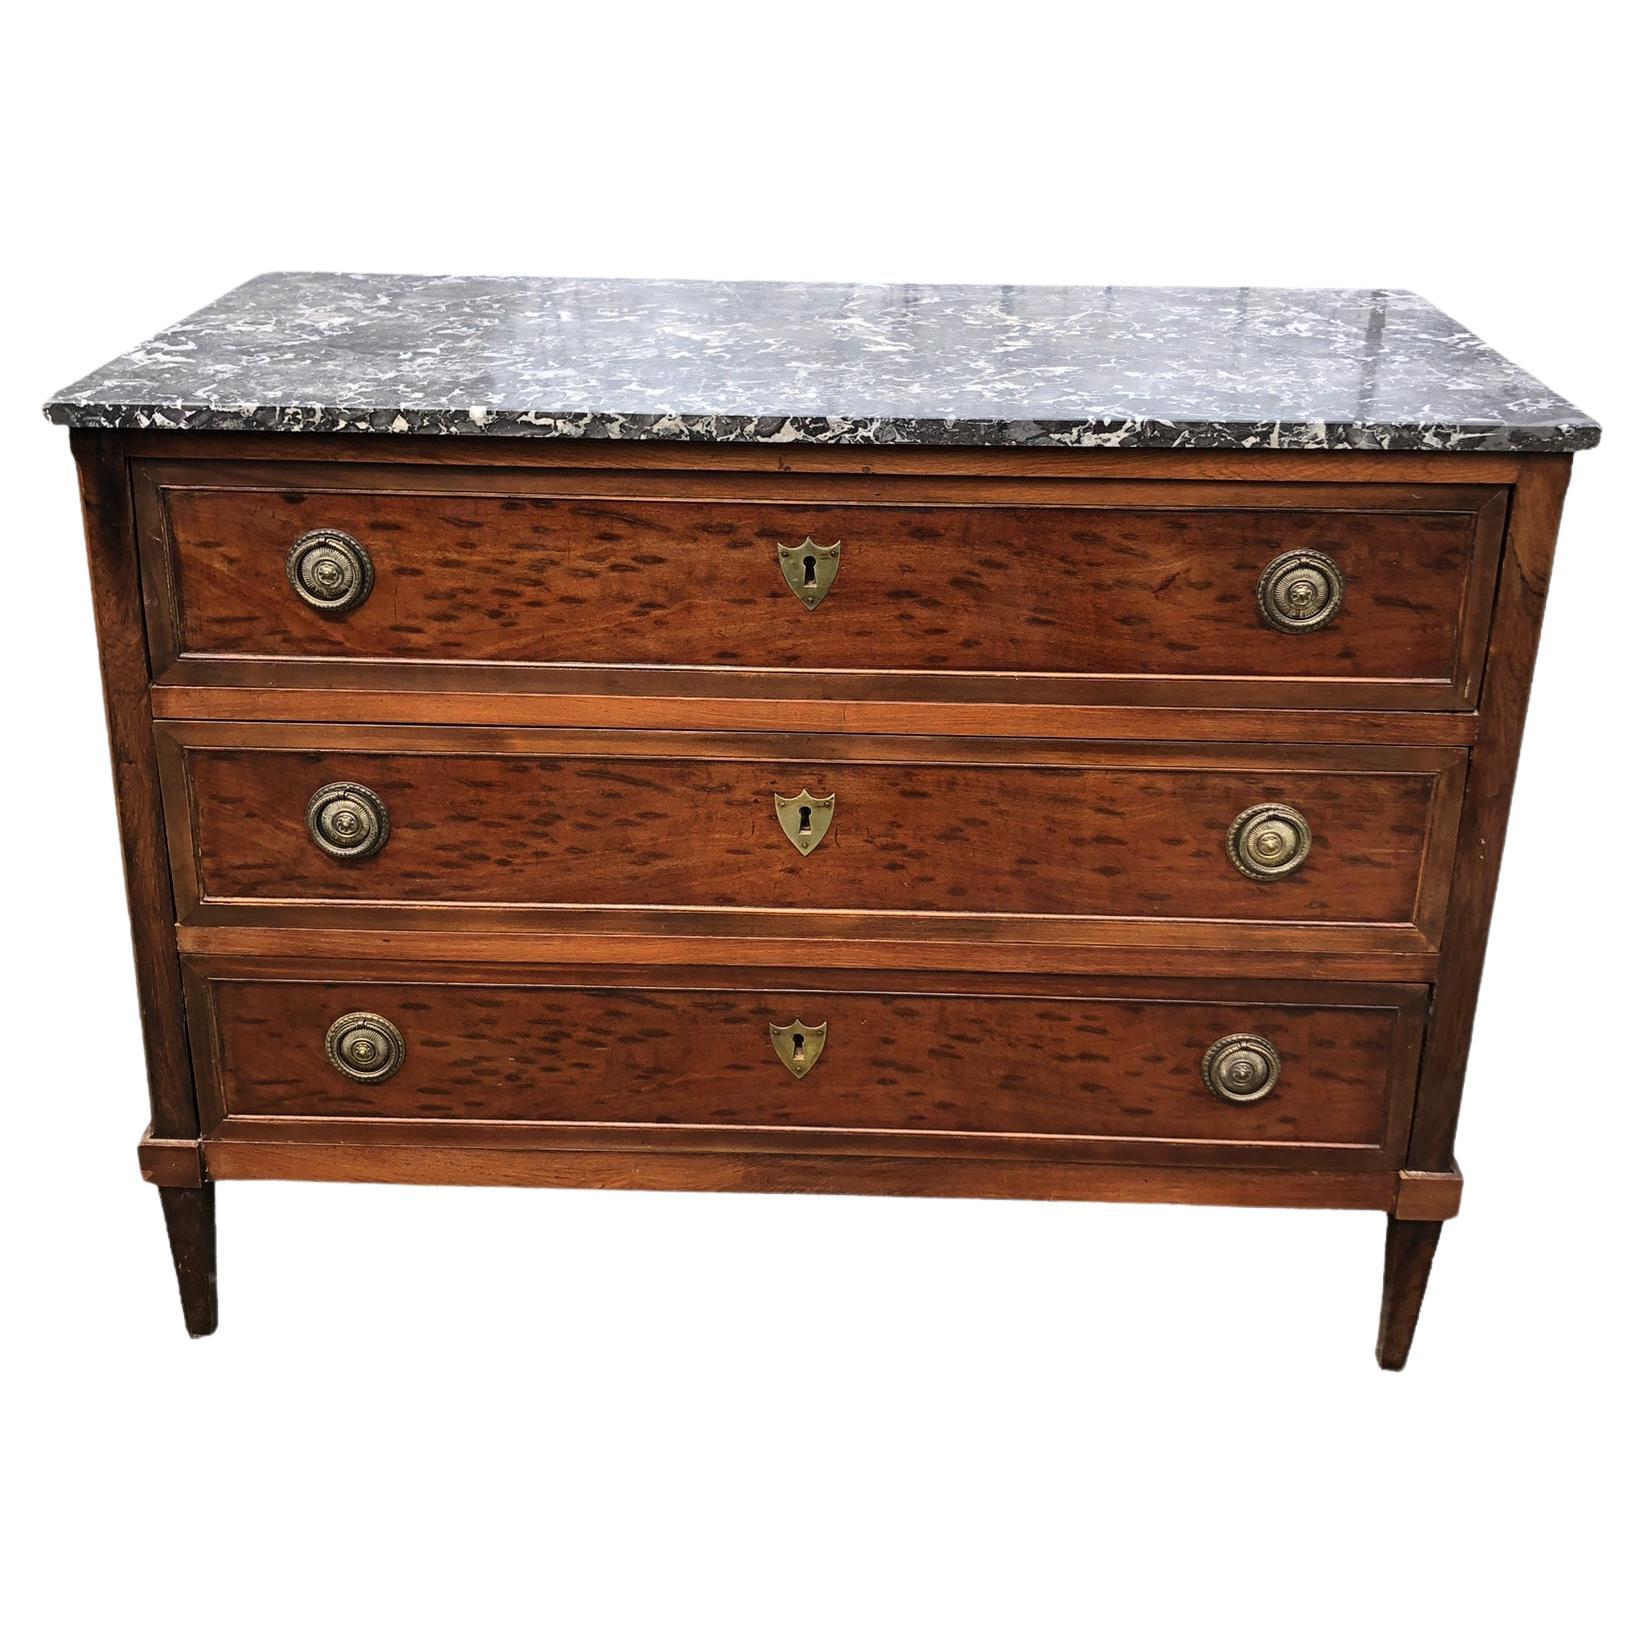 19th Century Louis XVI Style Marble Top Plum Pudding Mahogany Chest For Sale